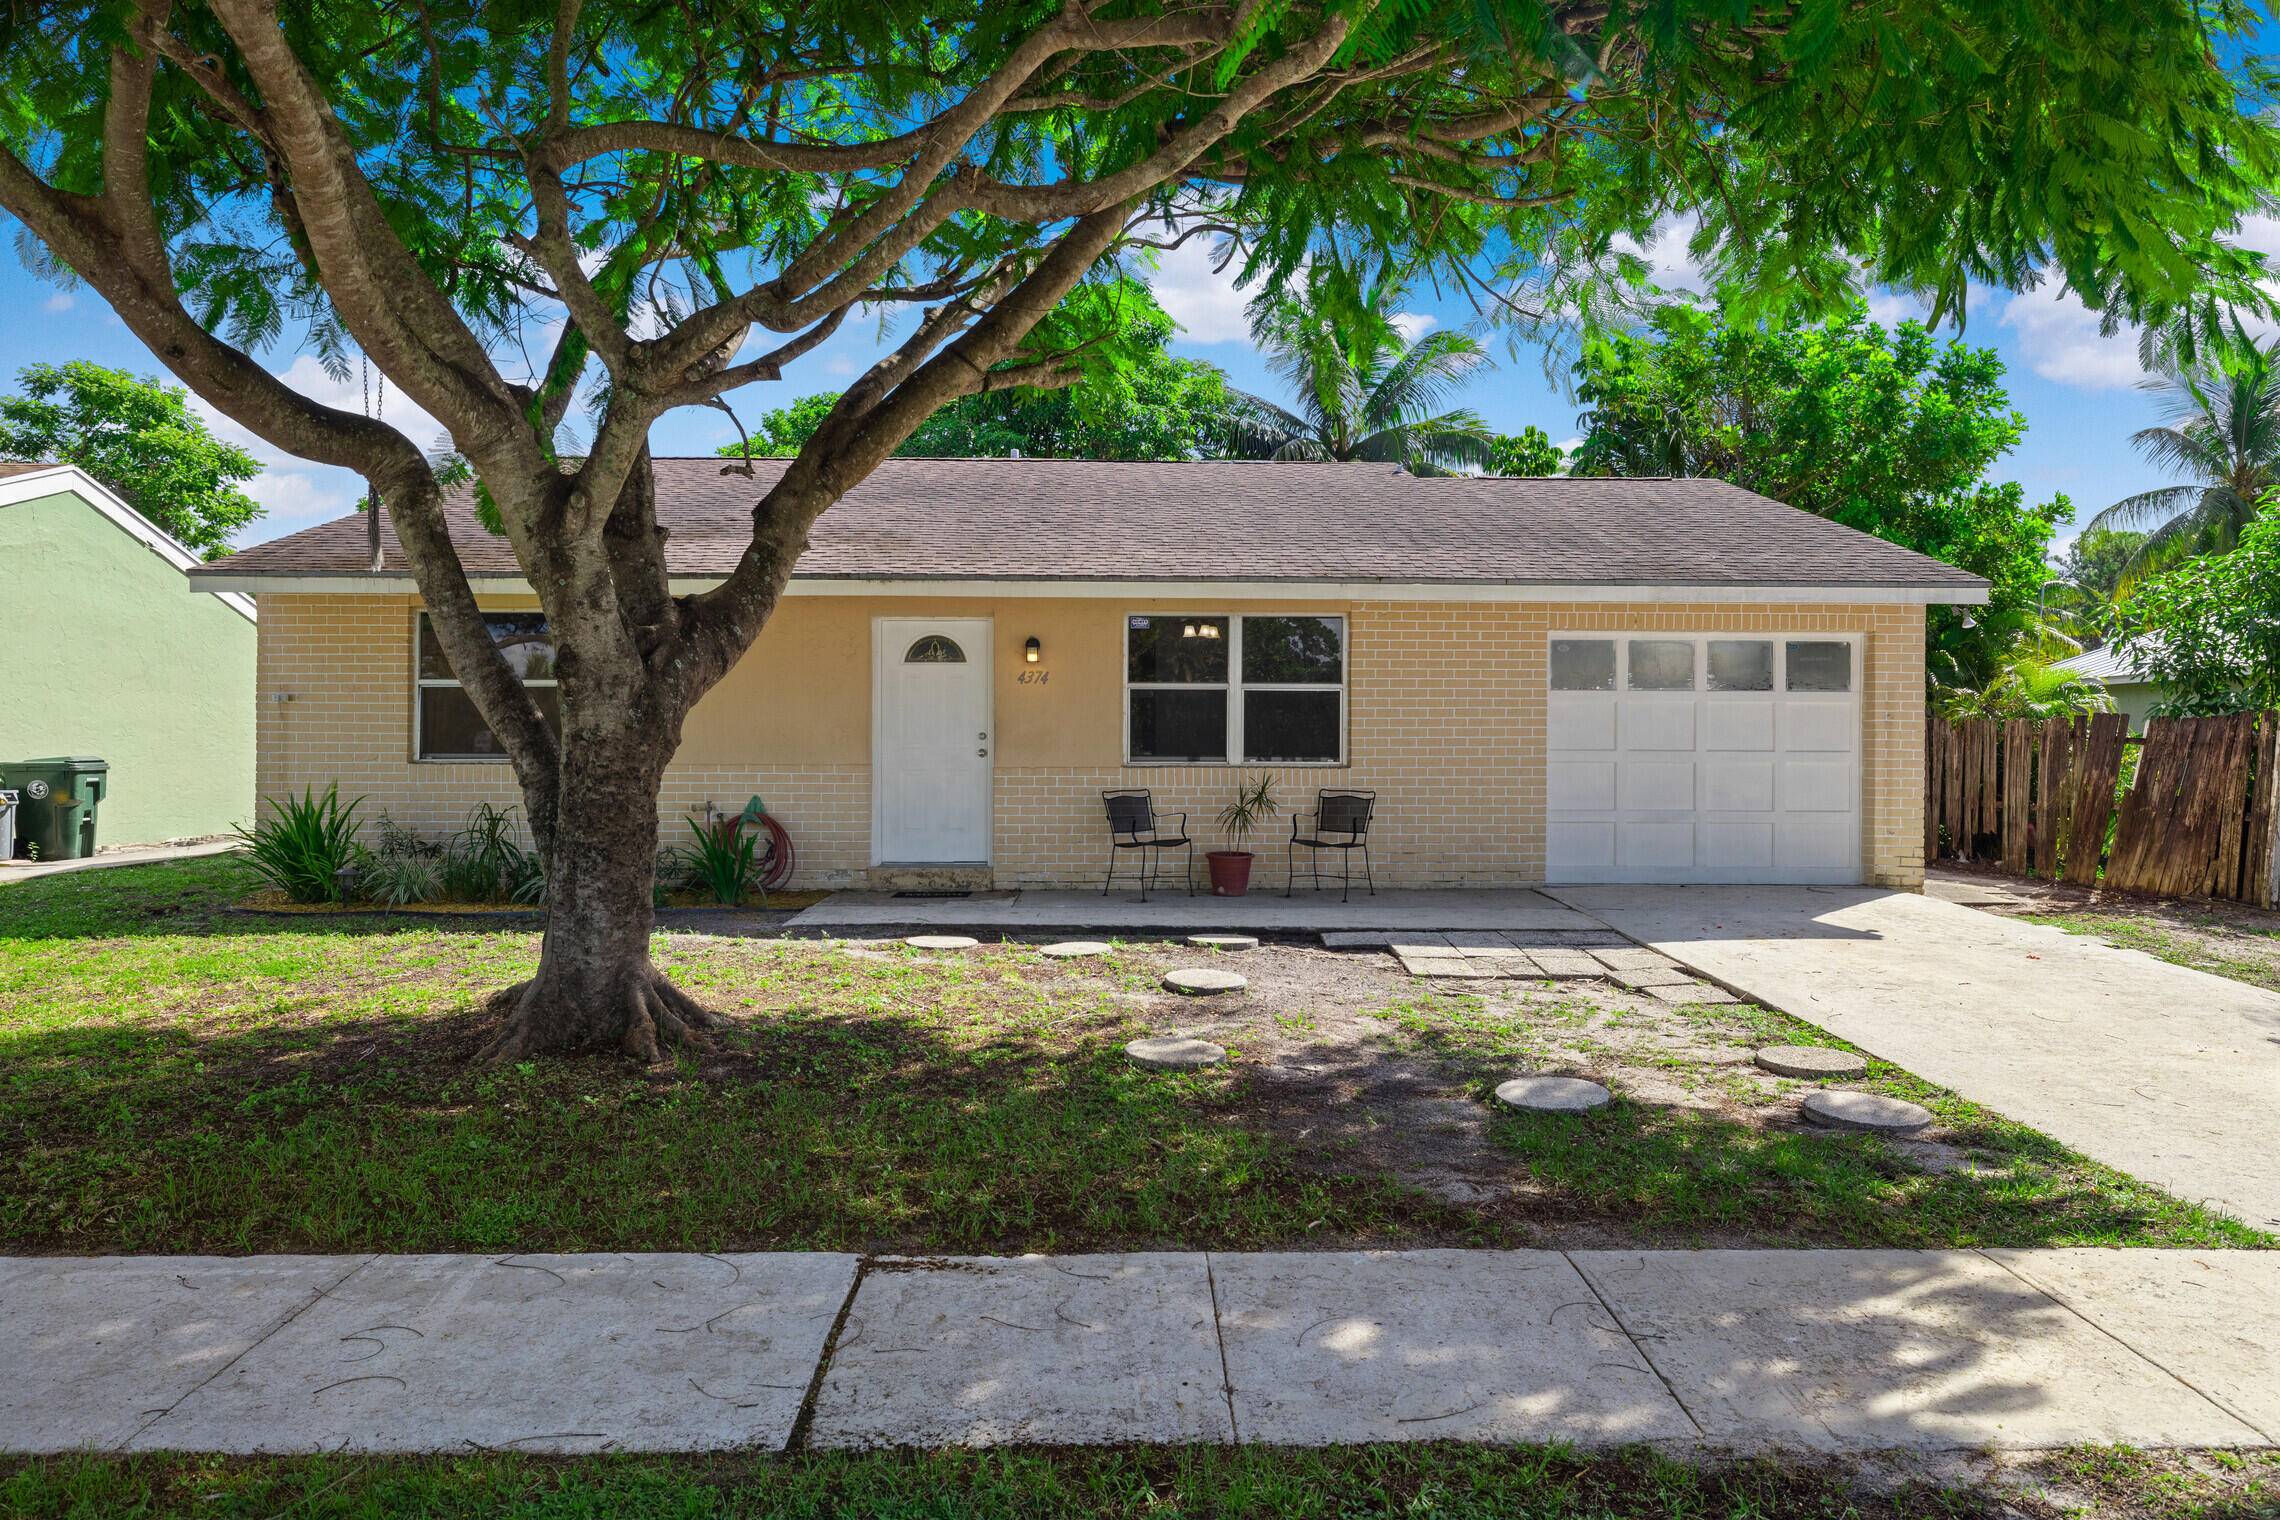 Beautifully remodeled 3 bedroom 2 bath single family home with No HOA in Greenacres.